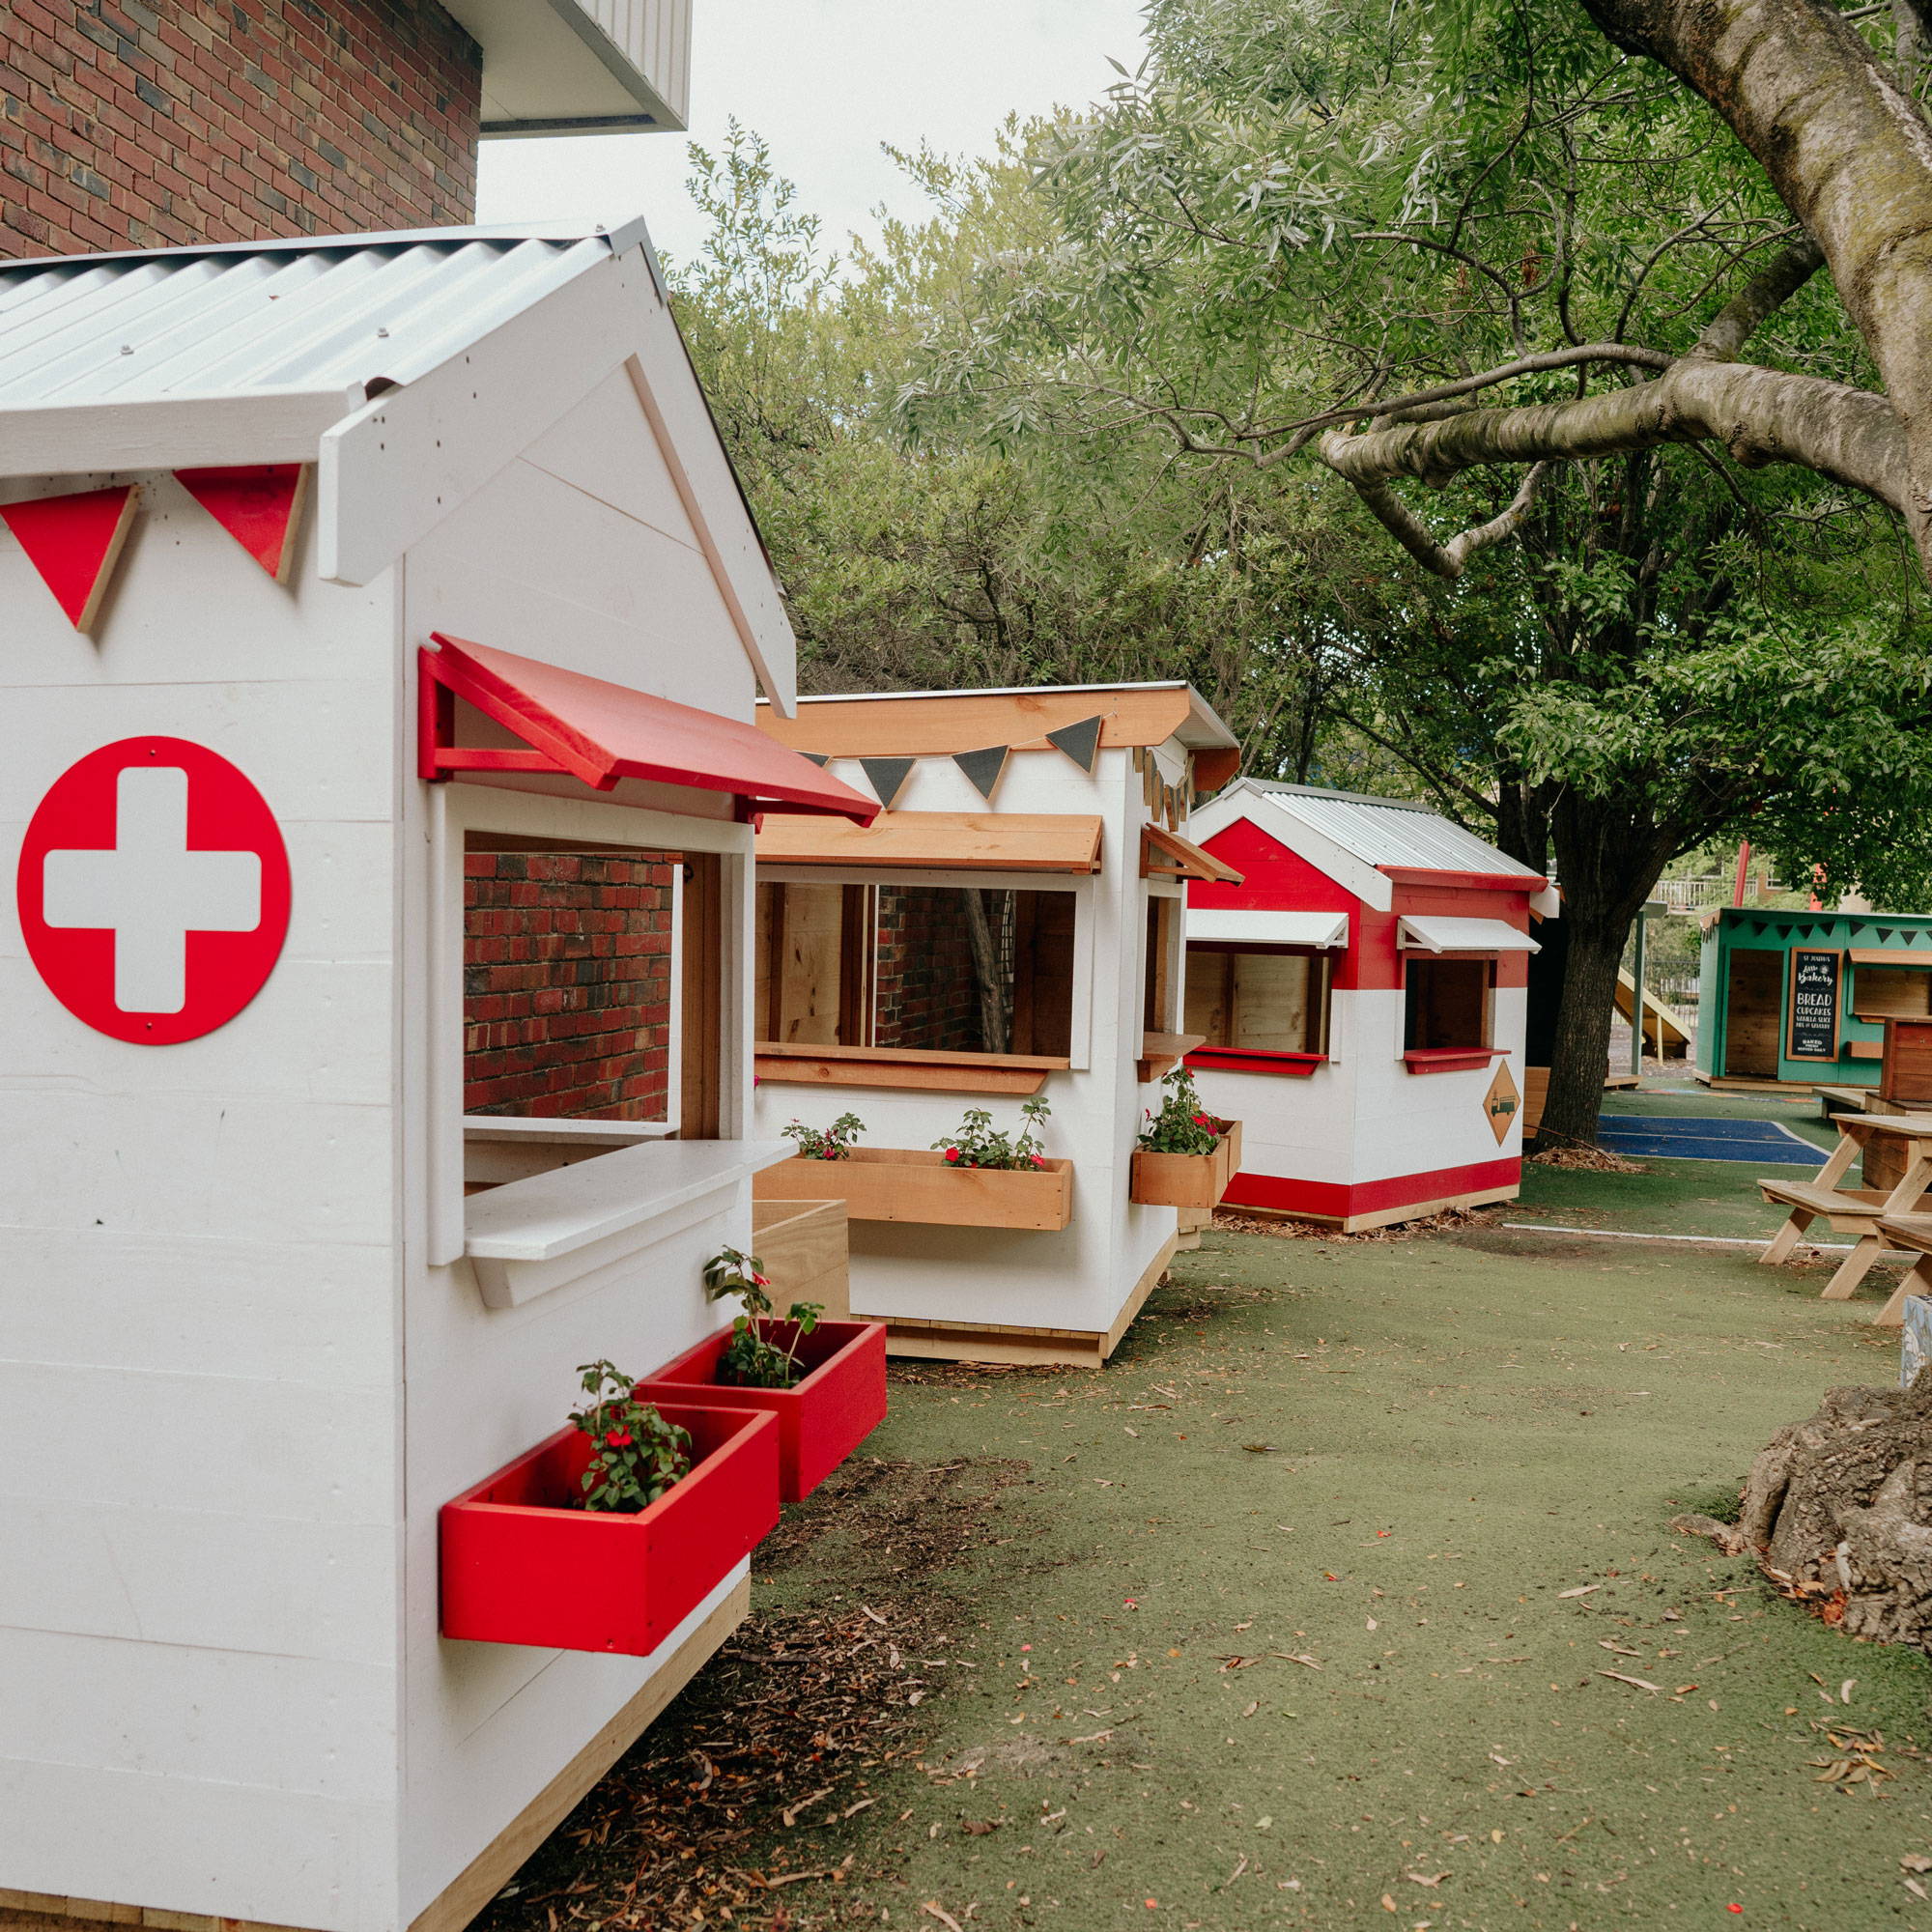 Play-based Learning space with multiple Signature Cubby Houses at St Joseph's Primary School, Cubby Houses